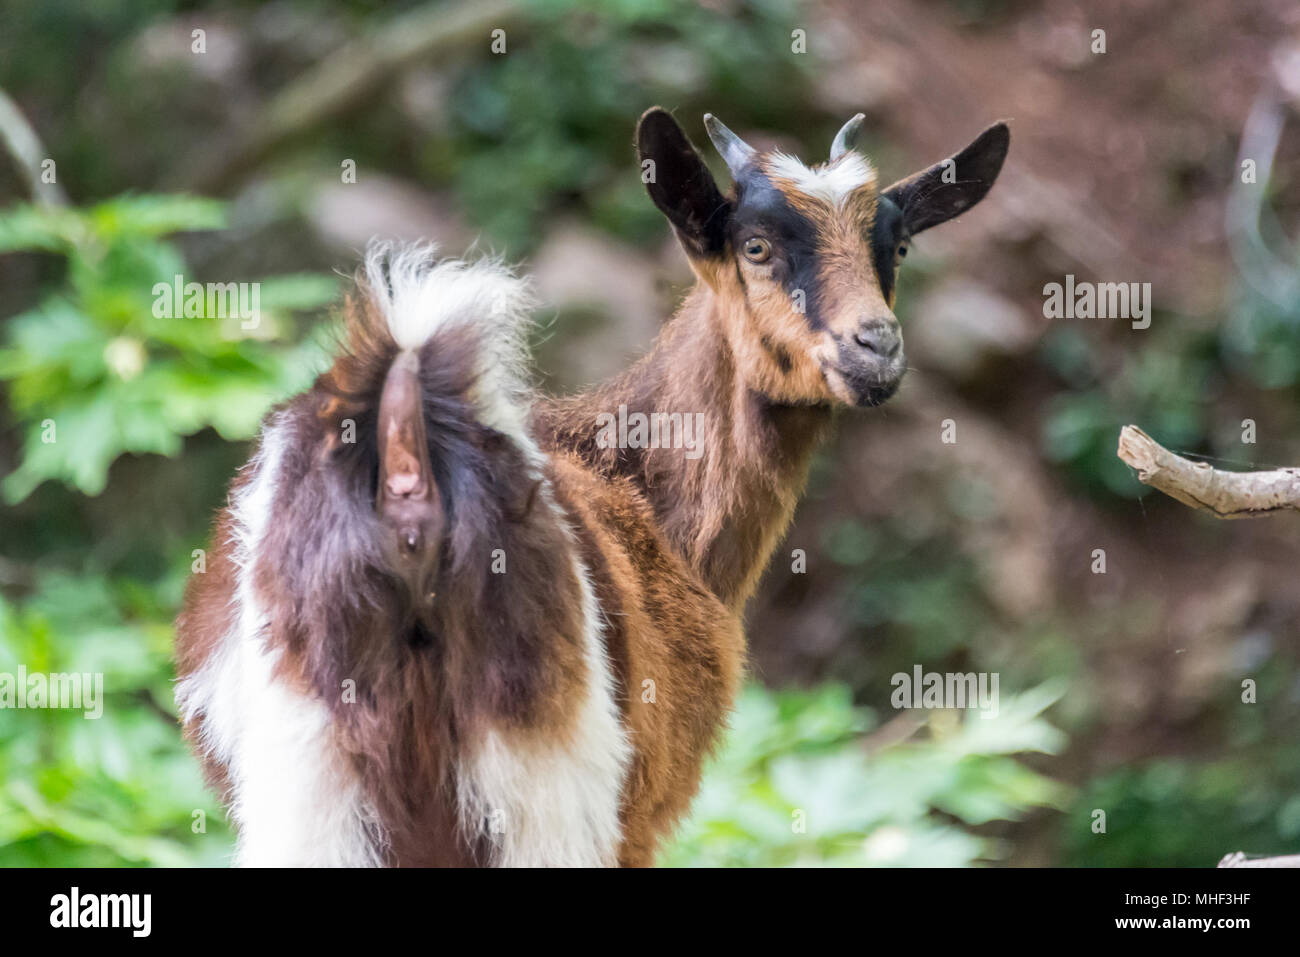 Portrait of a curious goat kid turning to look at the camera on a trekking path in Crete, Greece Stock Photo